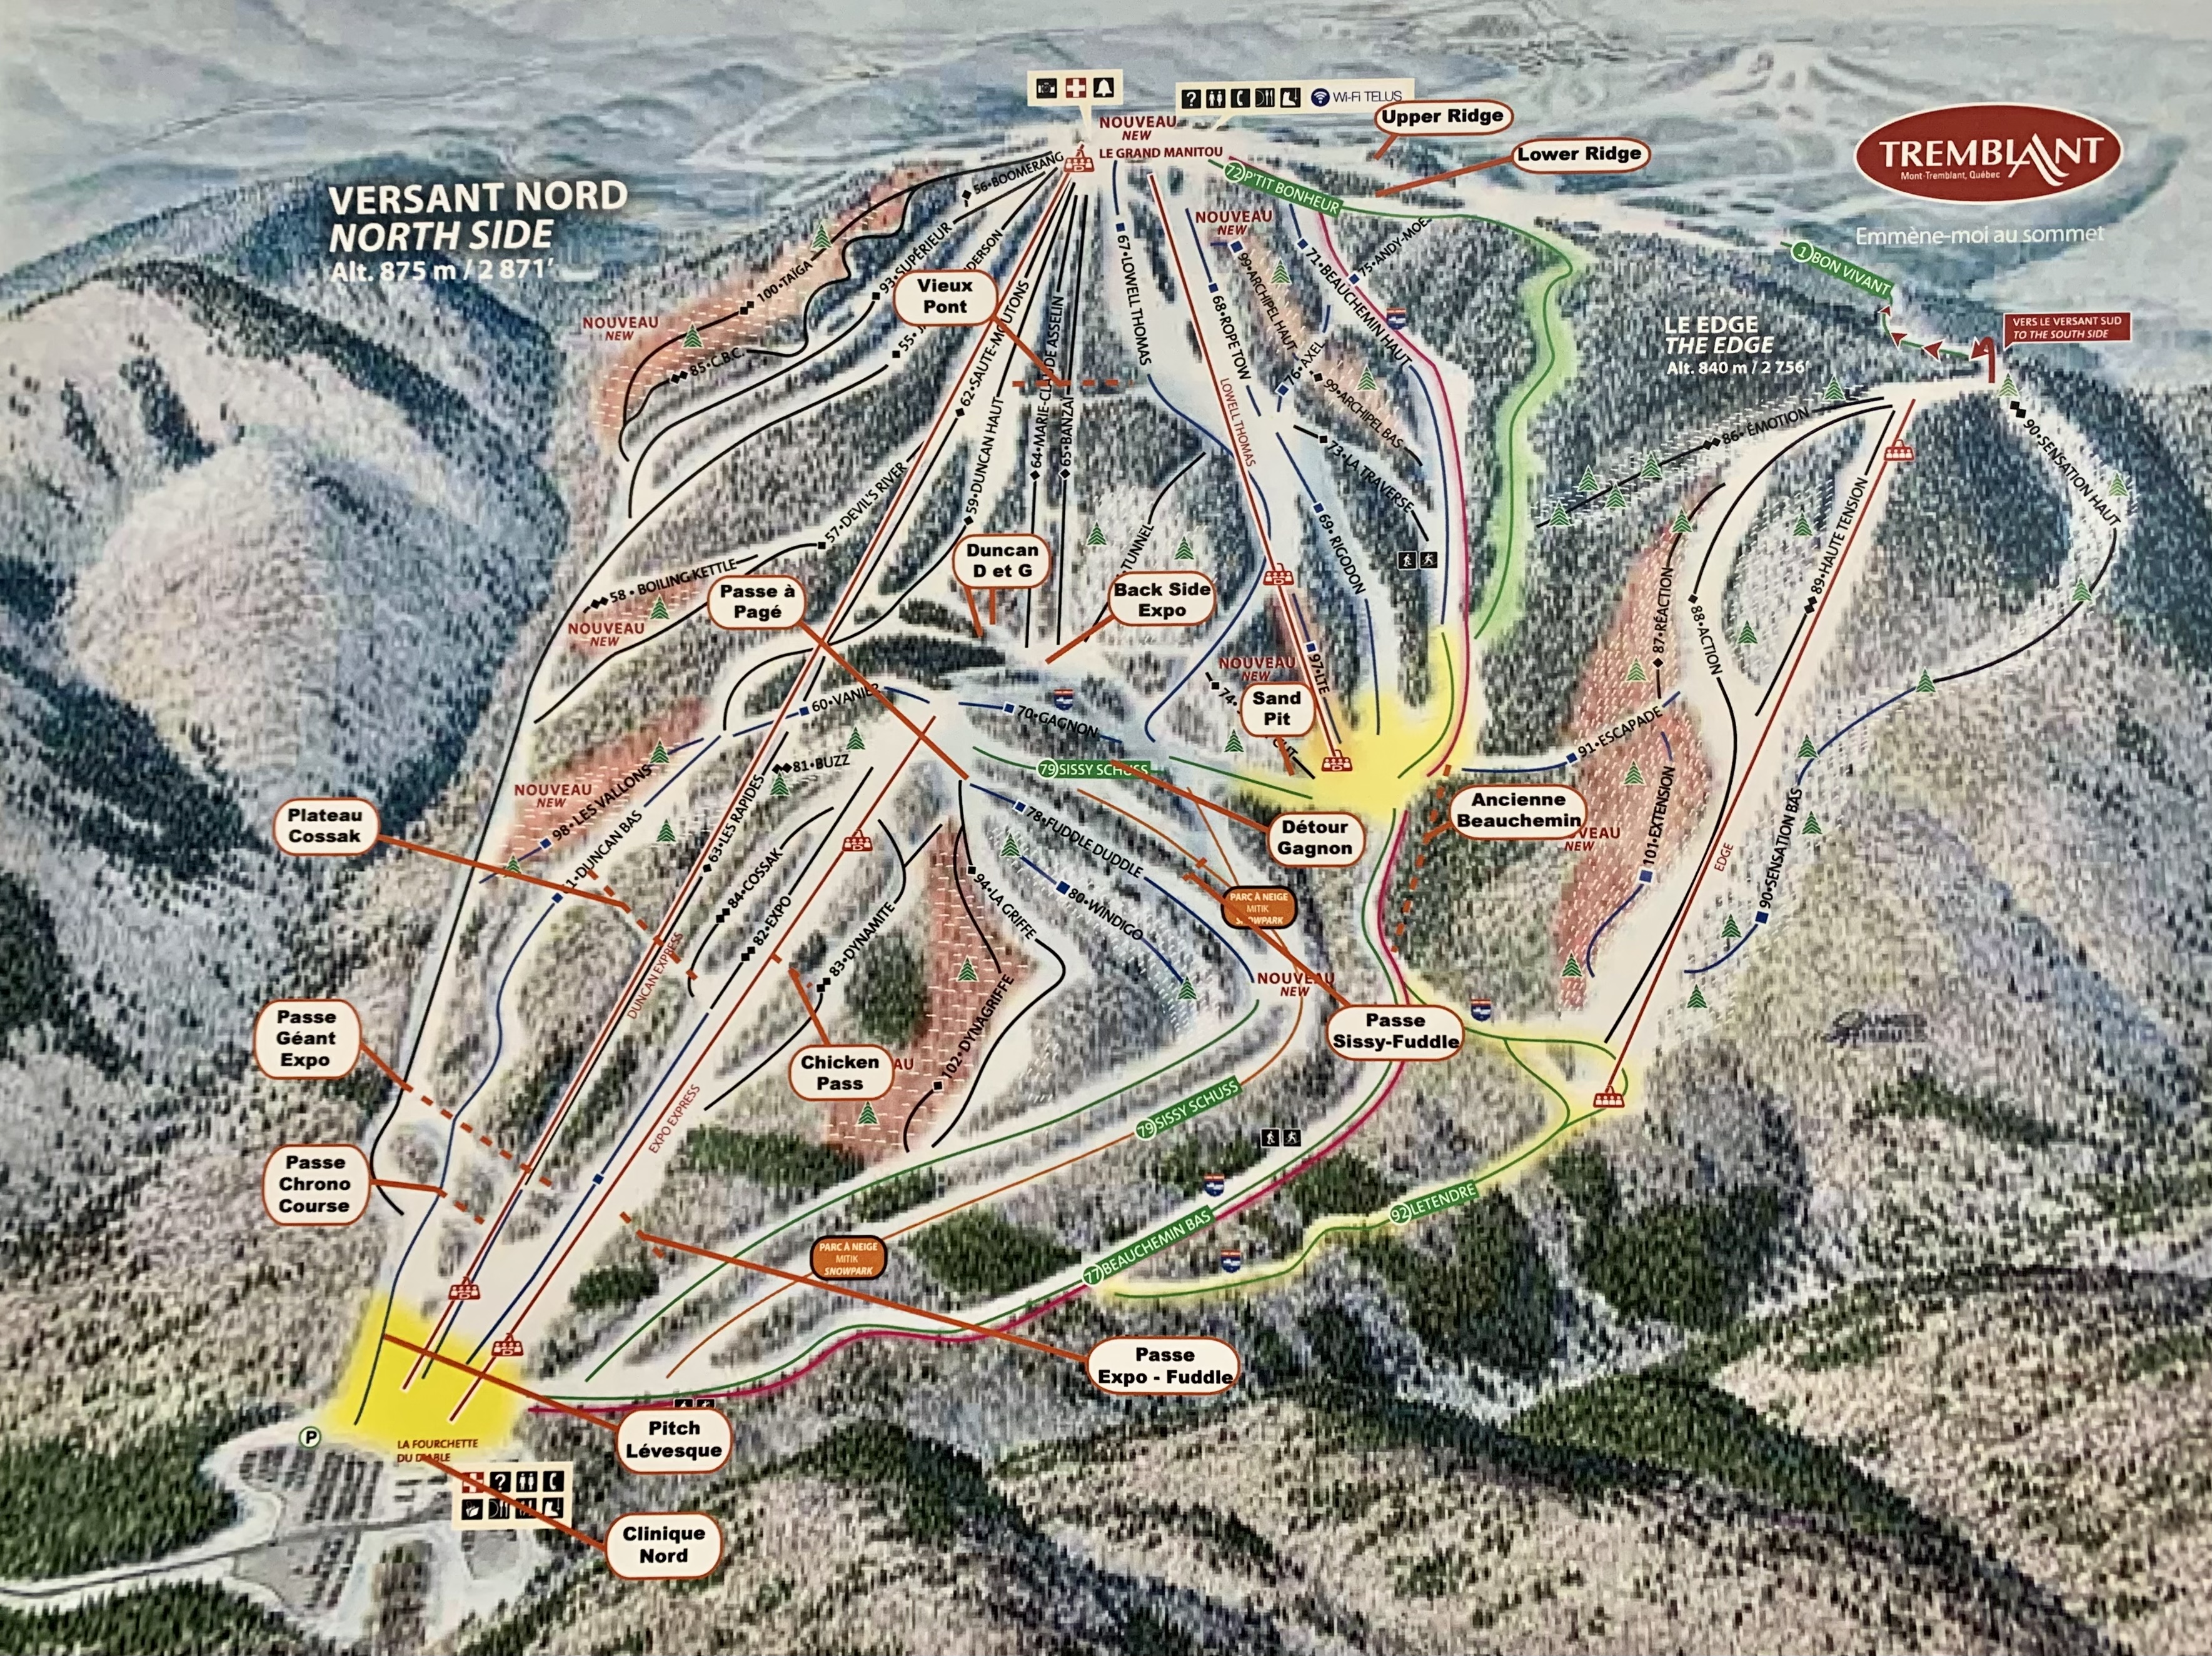 Tremblant points of interest map 2 north